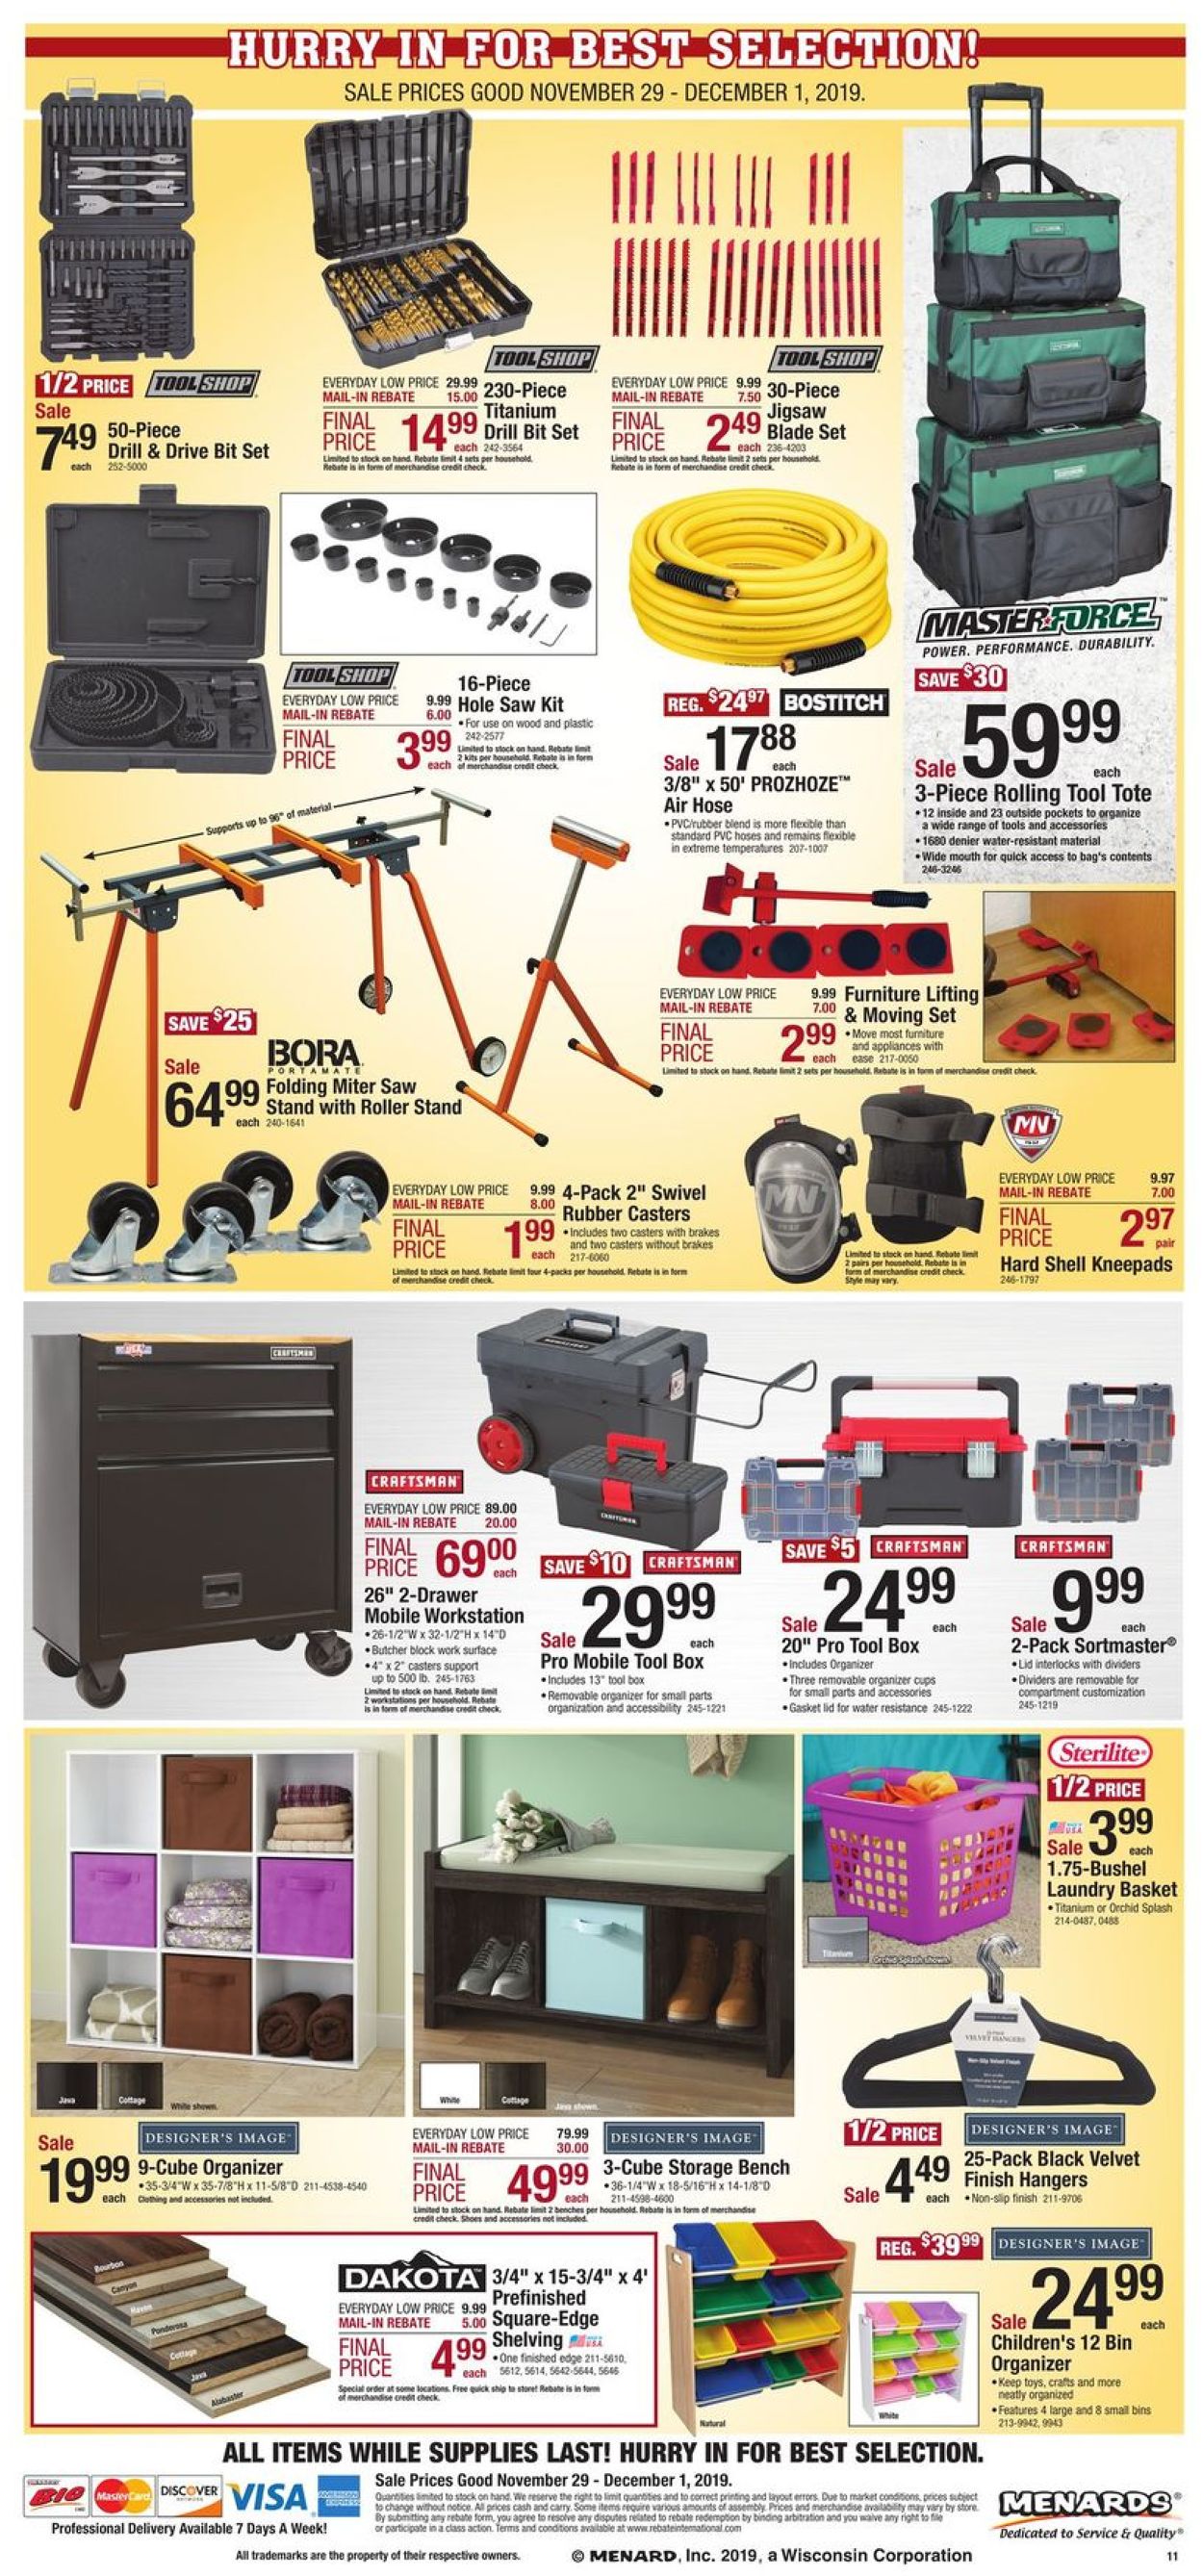 Menards - Black Friday Sale 2019 Current weekly ad 11/29 - 12/01/2019 [10] - www.bagssaleusa.com/product-category/classic-bags/